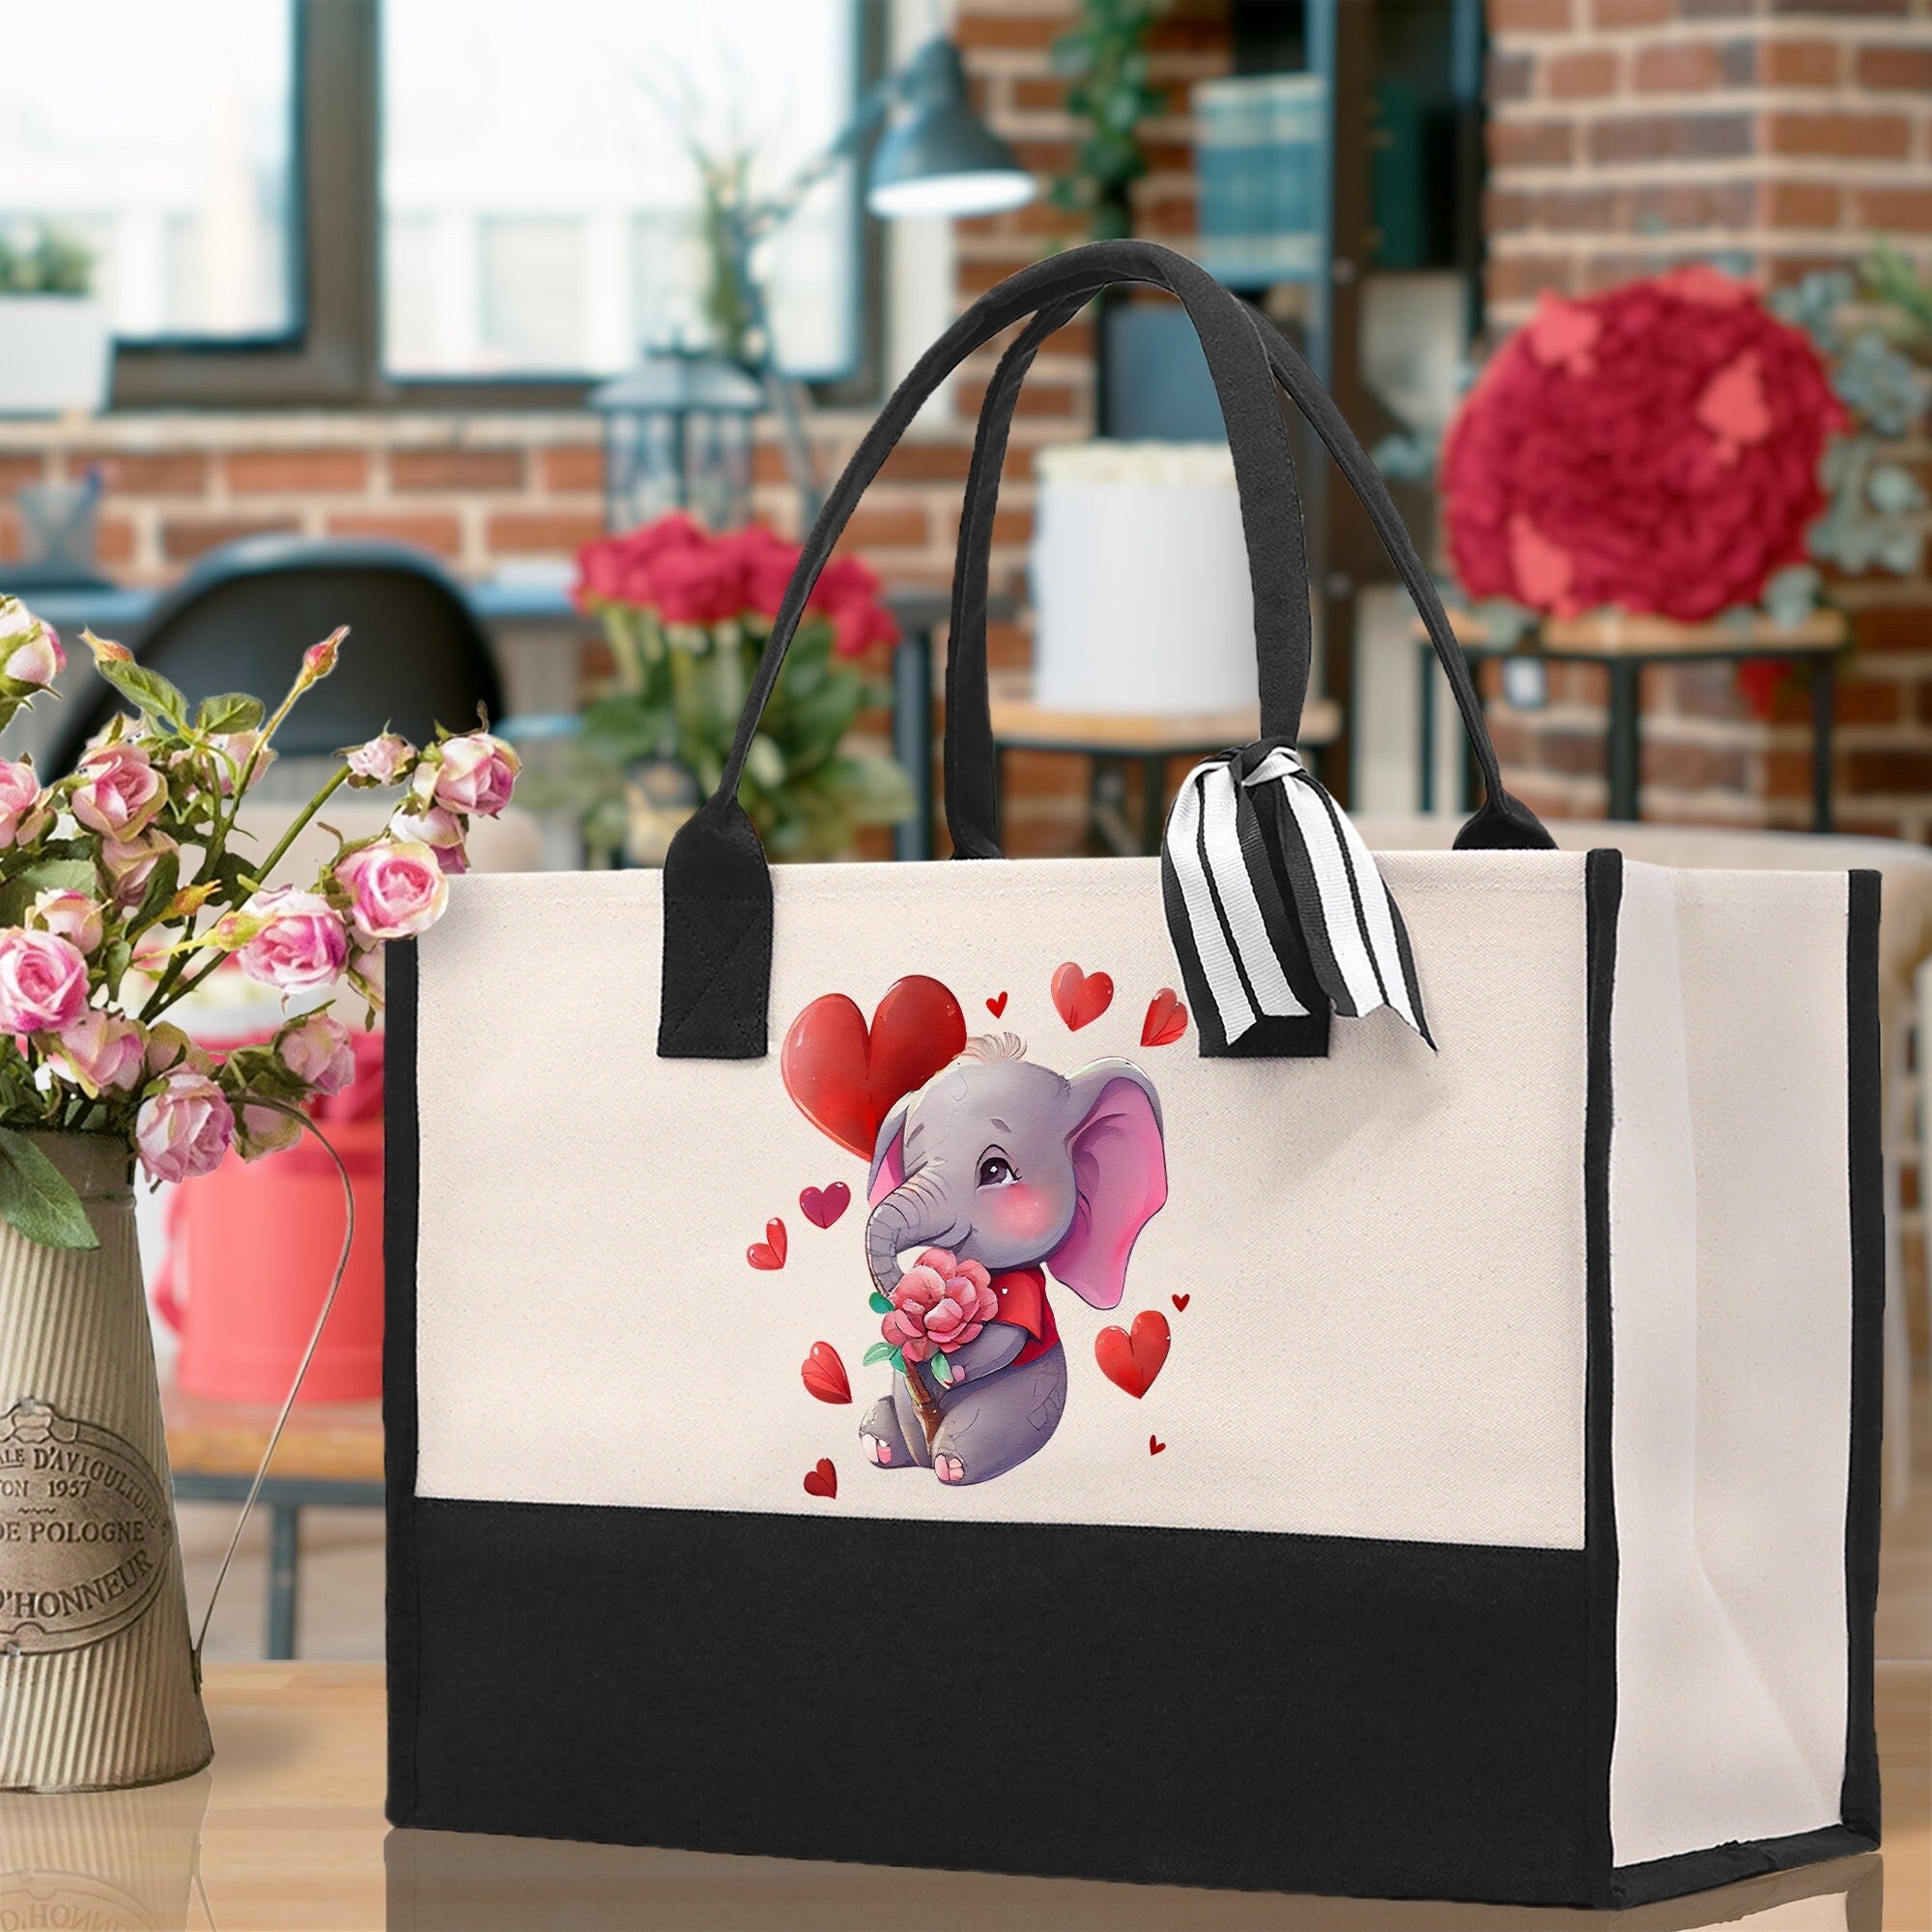 Cute Elephant Heart Canvas Tote Bag Happy Valentines Day Gift for Her Love Tote Bag Lovers Gift Mother Day Gift Cute Valentines Gift